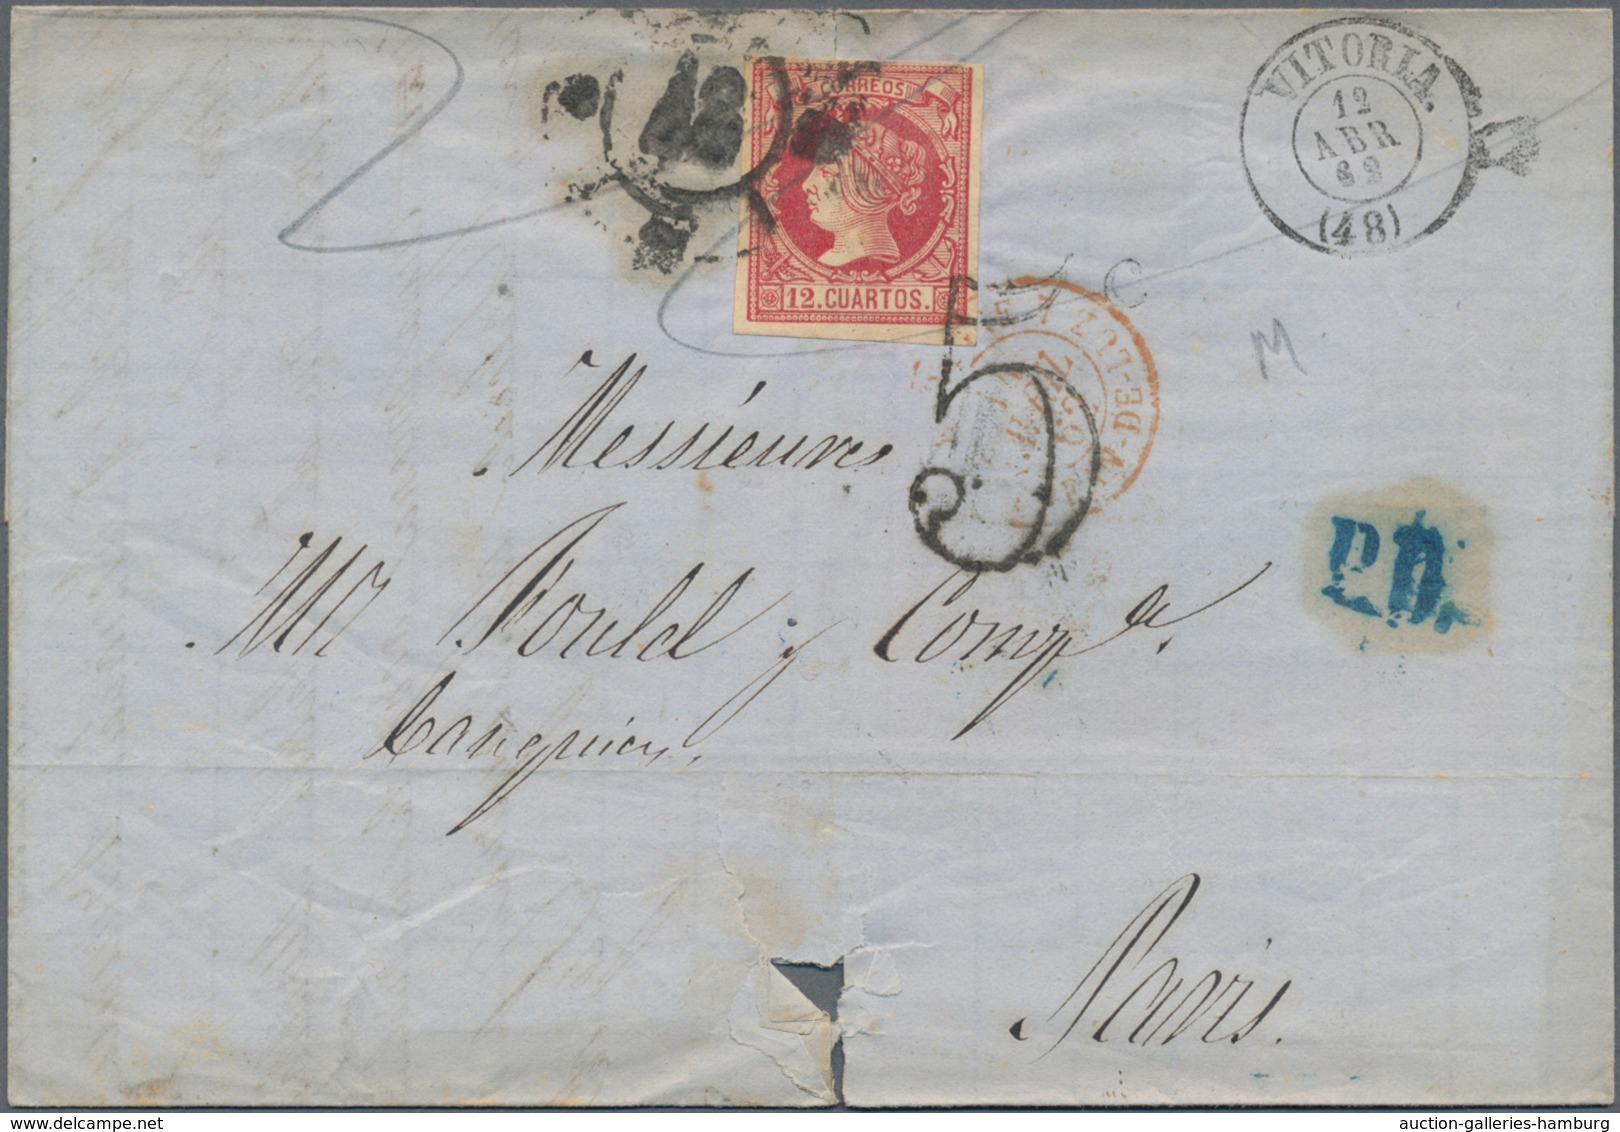 Spanien: 1860/1880, eight beautiful covers to France with nice single frankings, one with a pair. Go